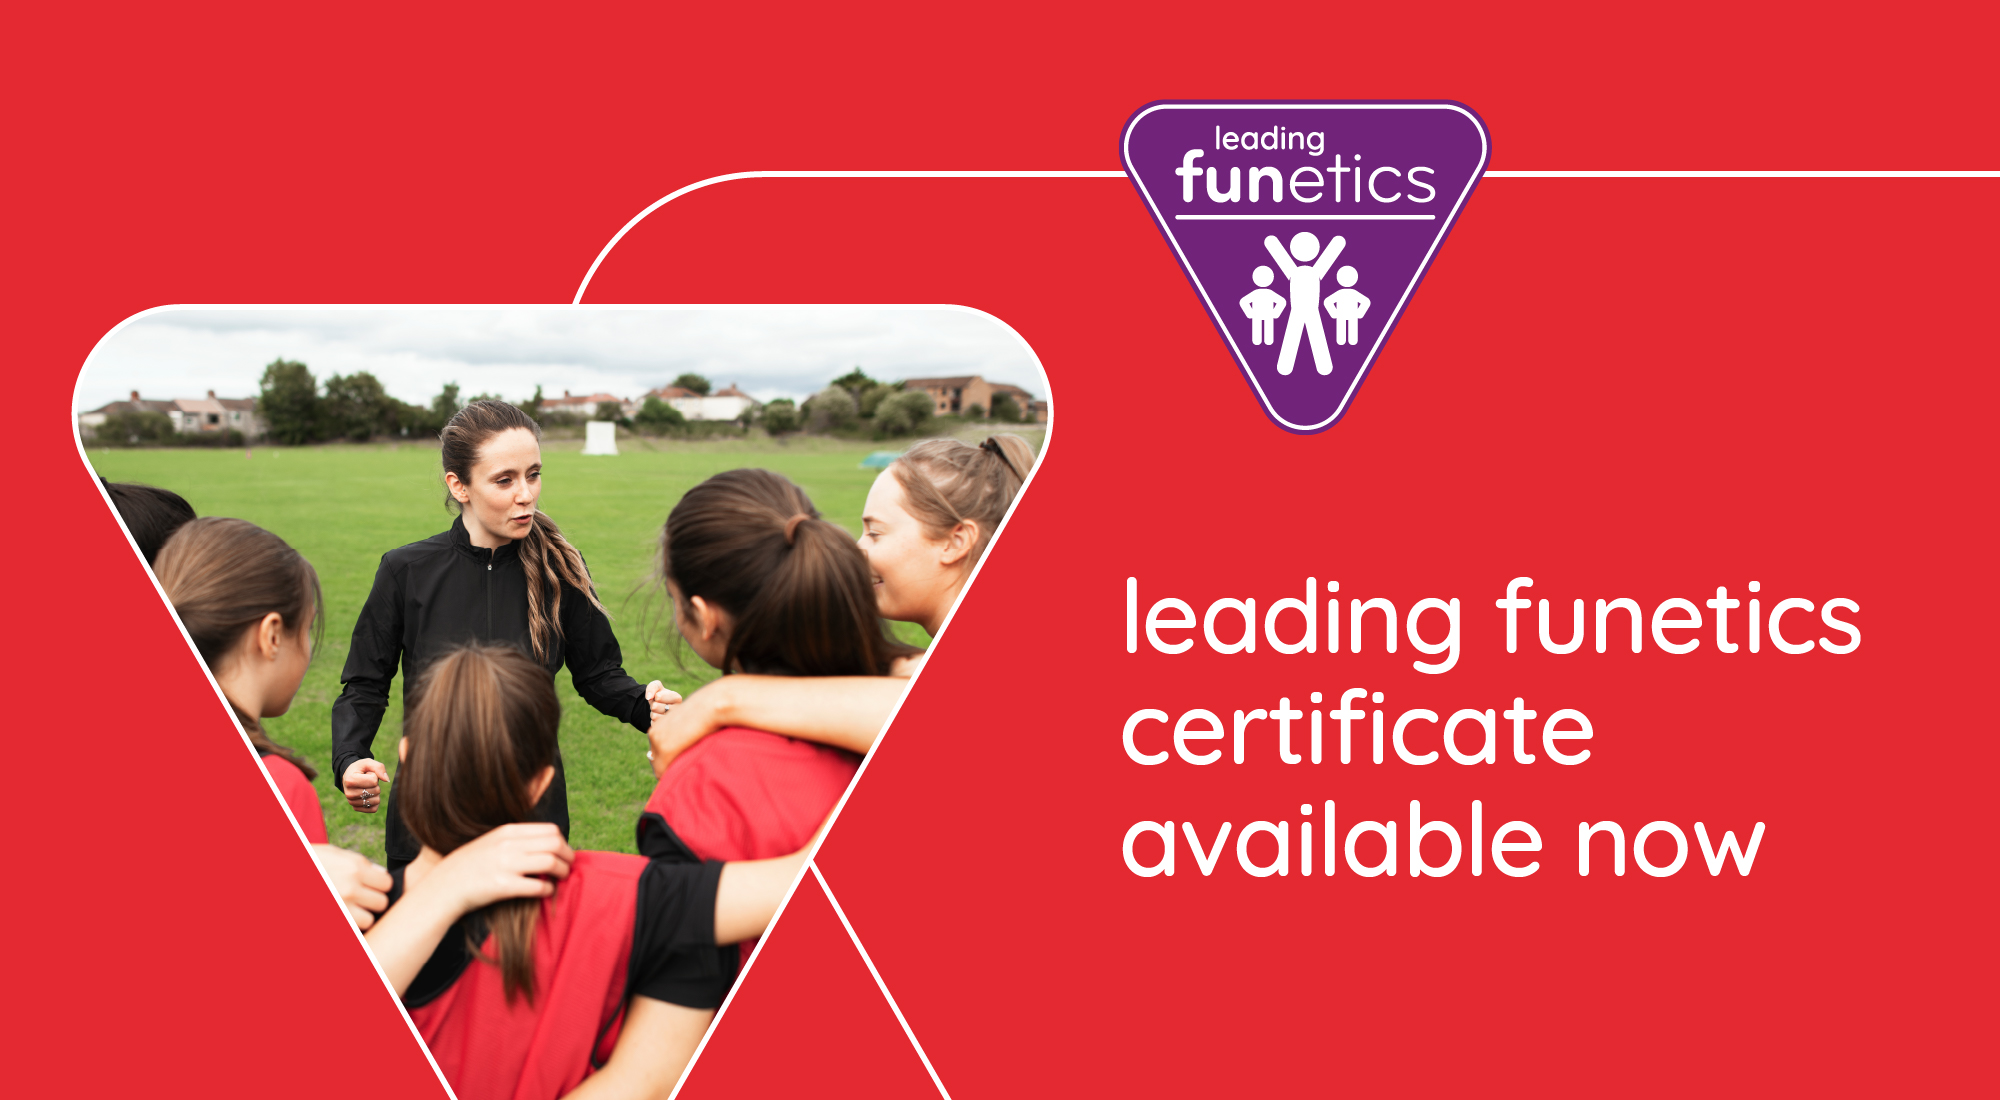 Leading funetics certificate available now